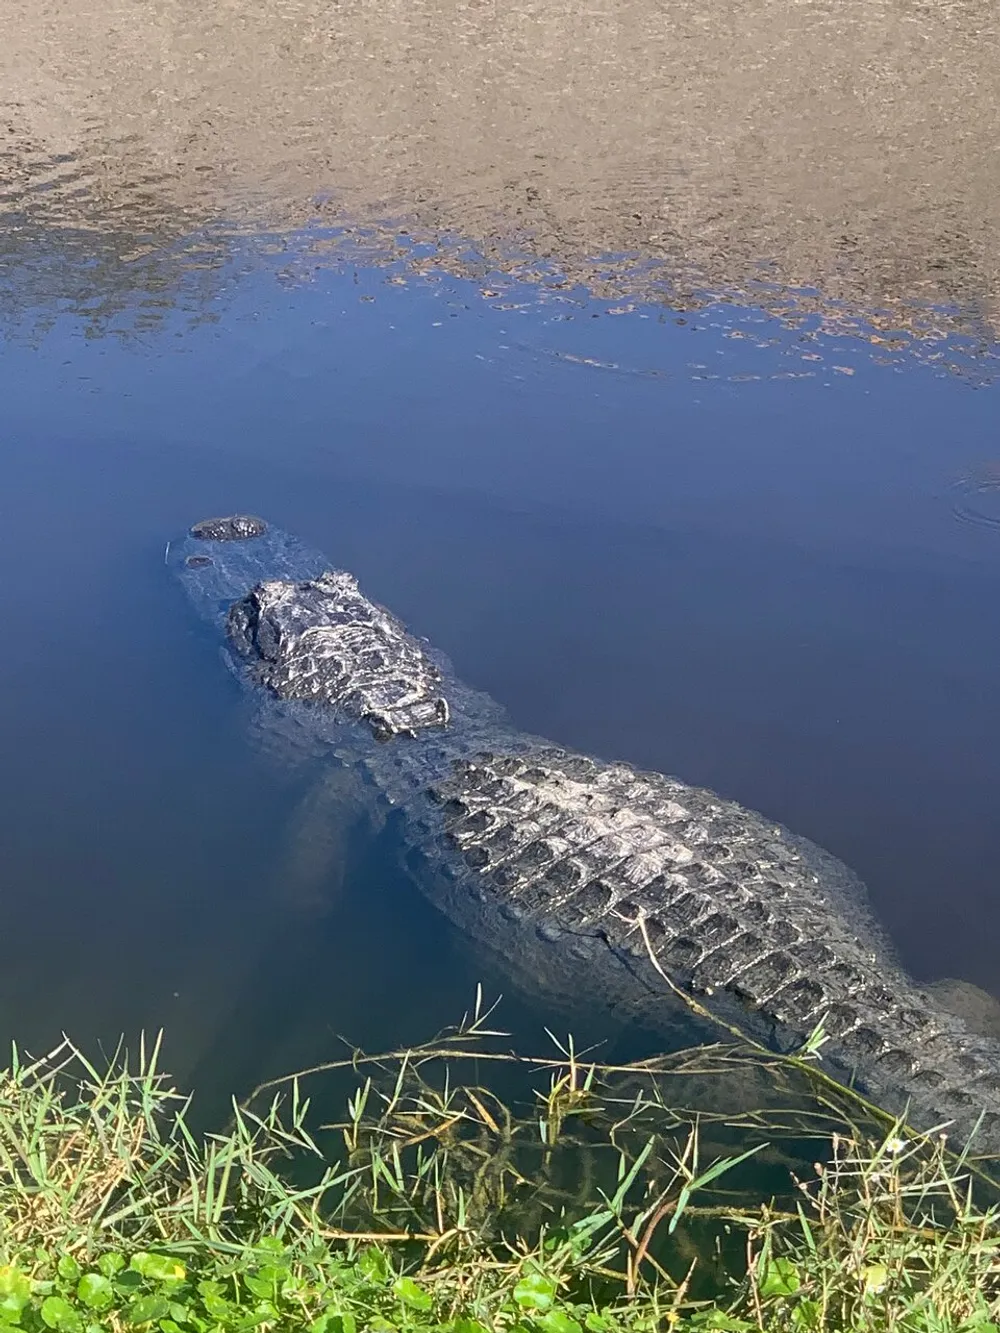 The image shows a large alligator partially submerged in water near the grassy edge of a body of water